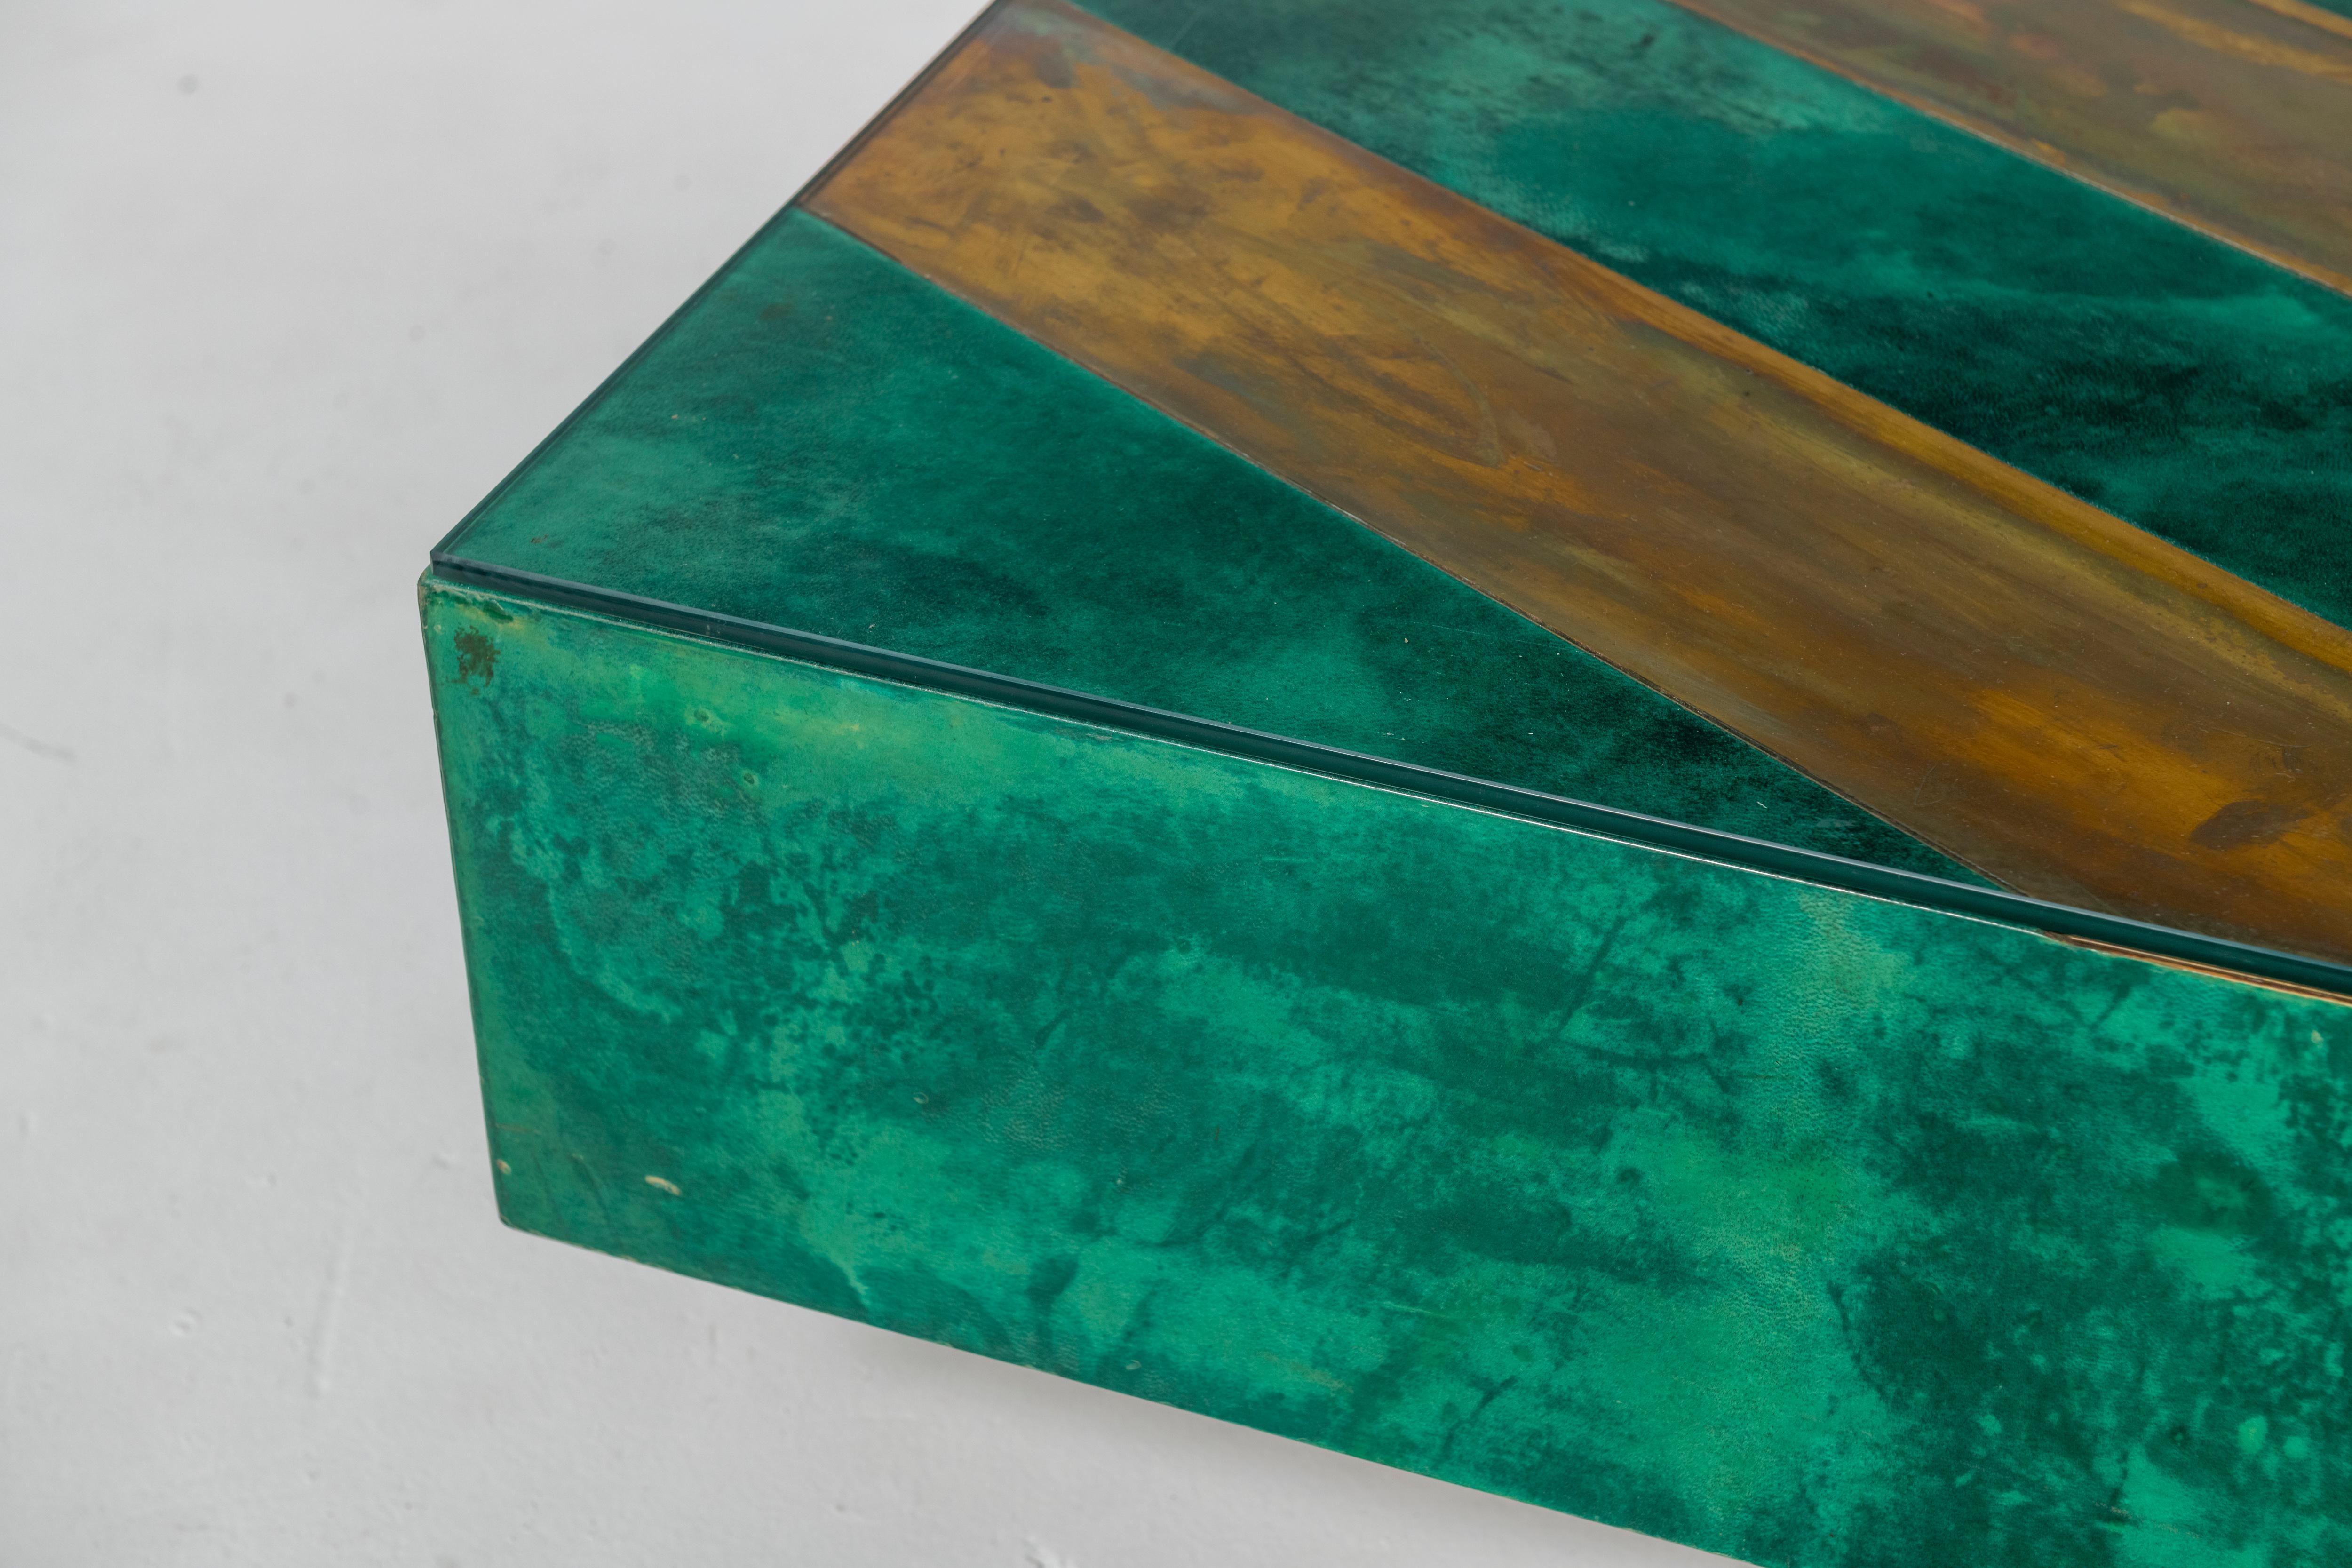 emerald green end table